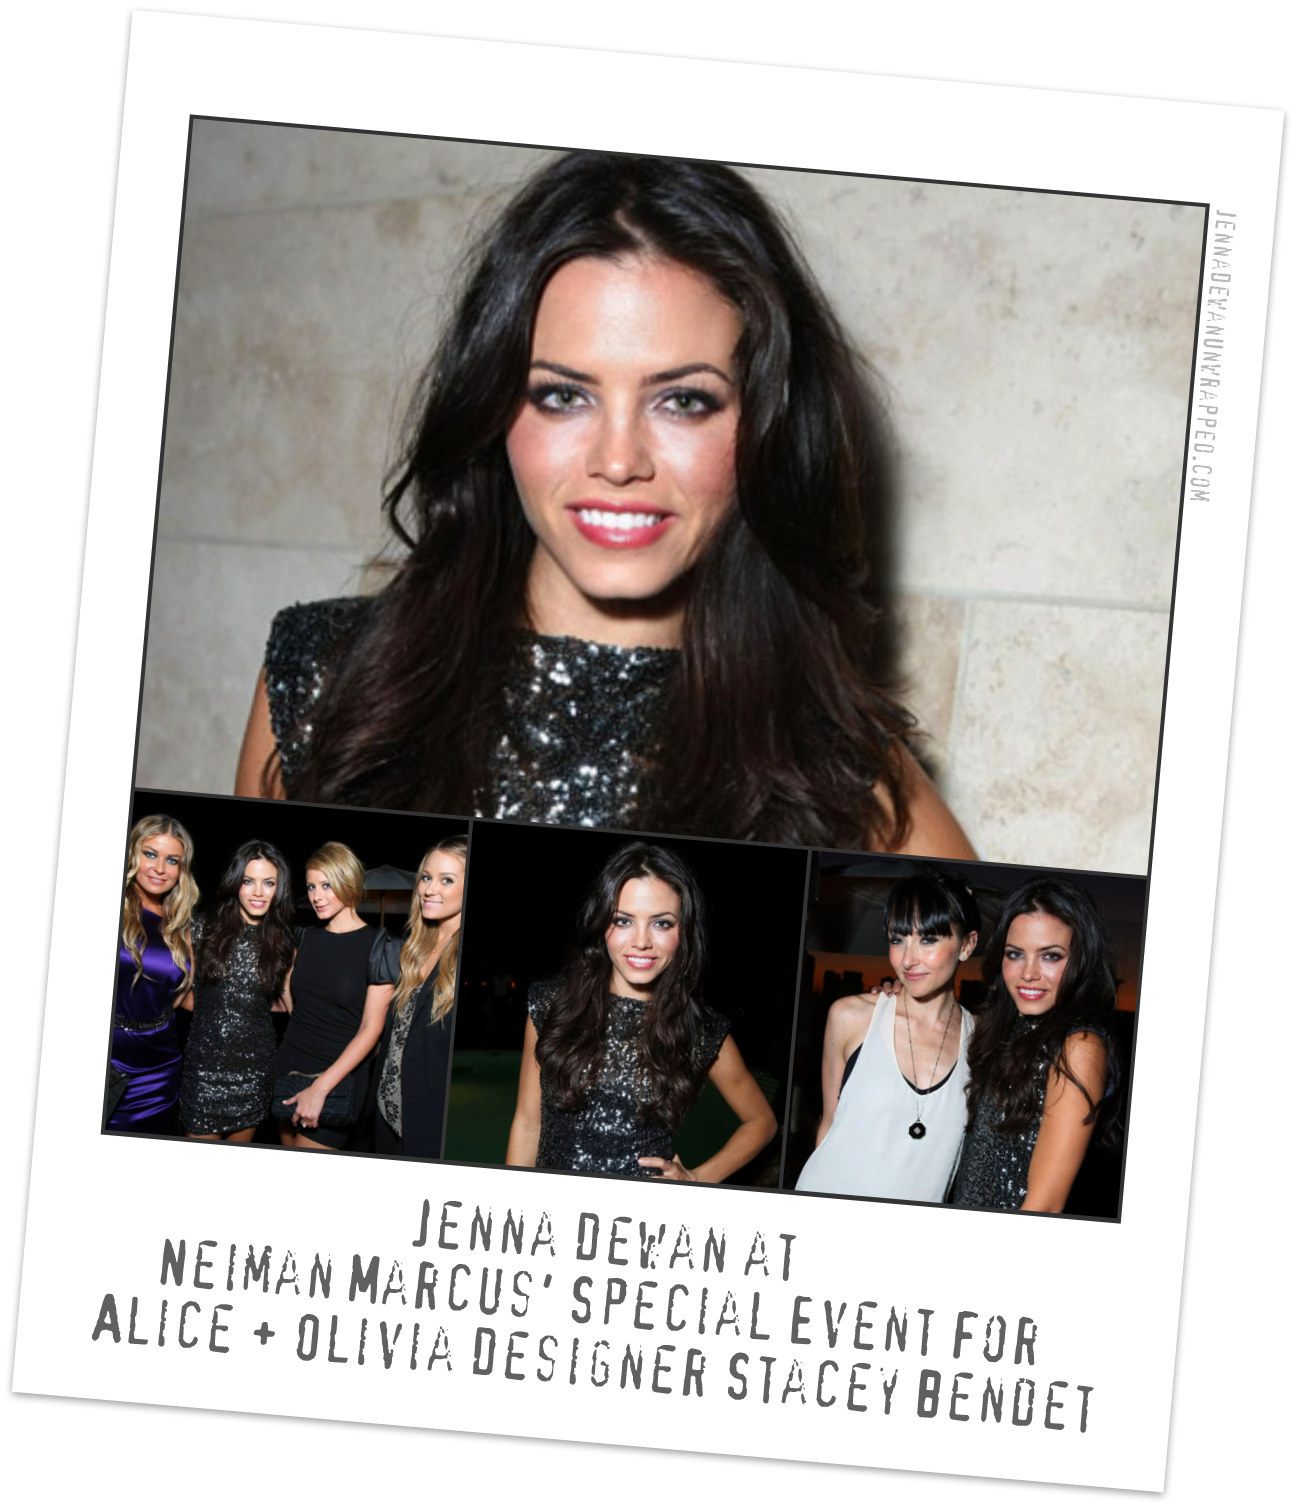 Jenna Dewan at Neiman Marcus’ Preview of Alice + Olivia’s Fall Collection